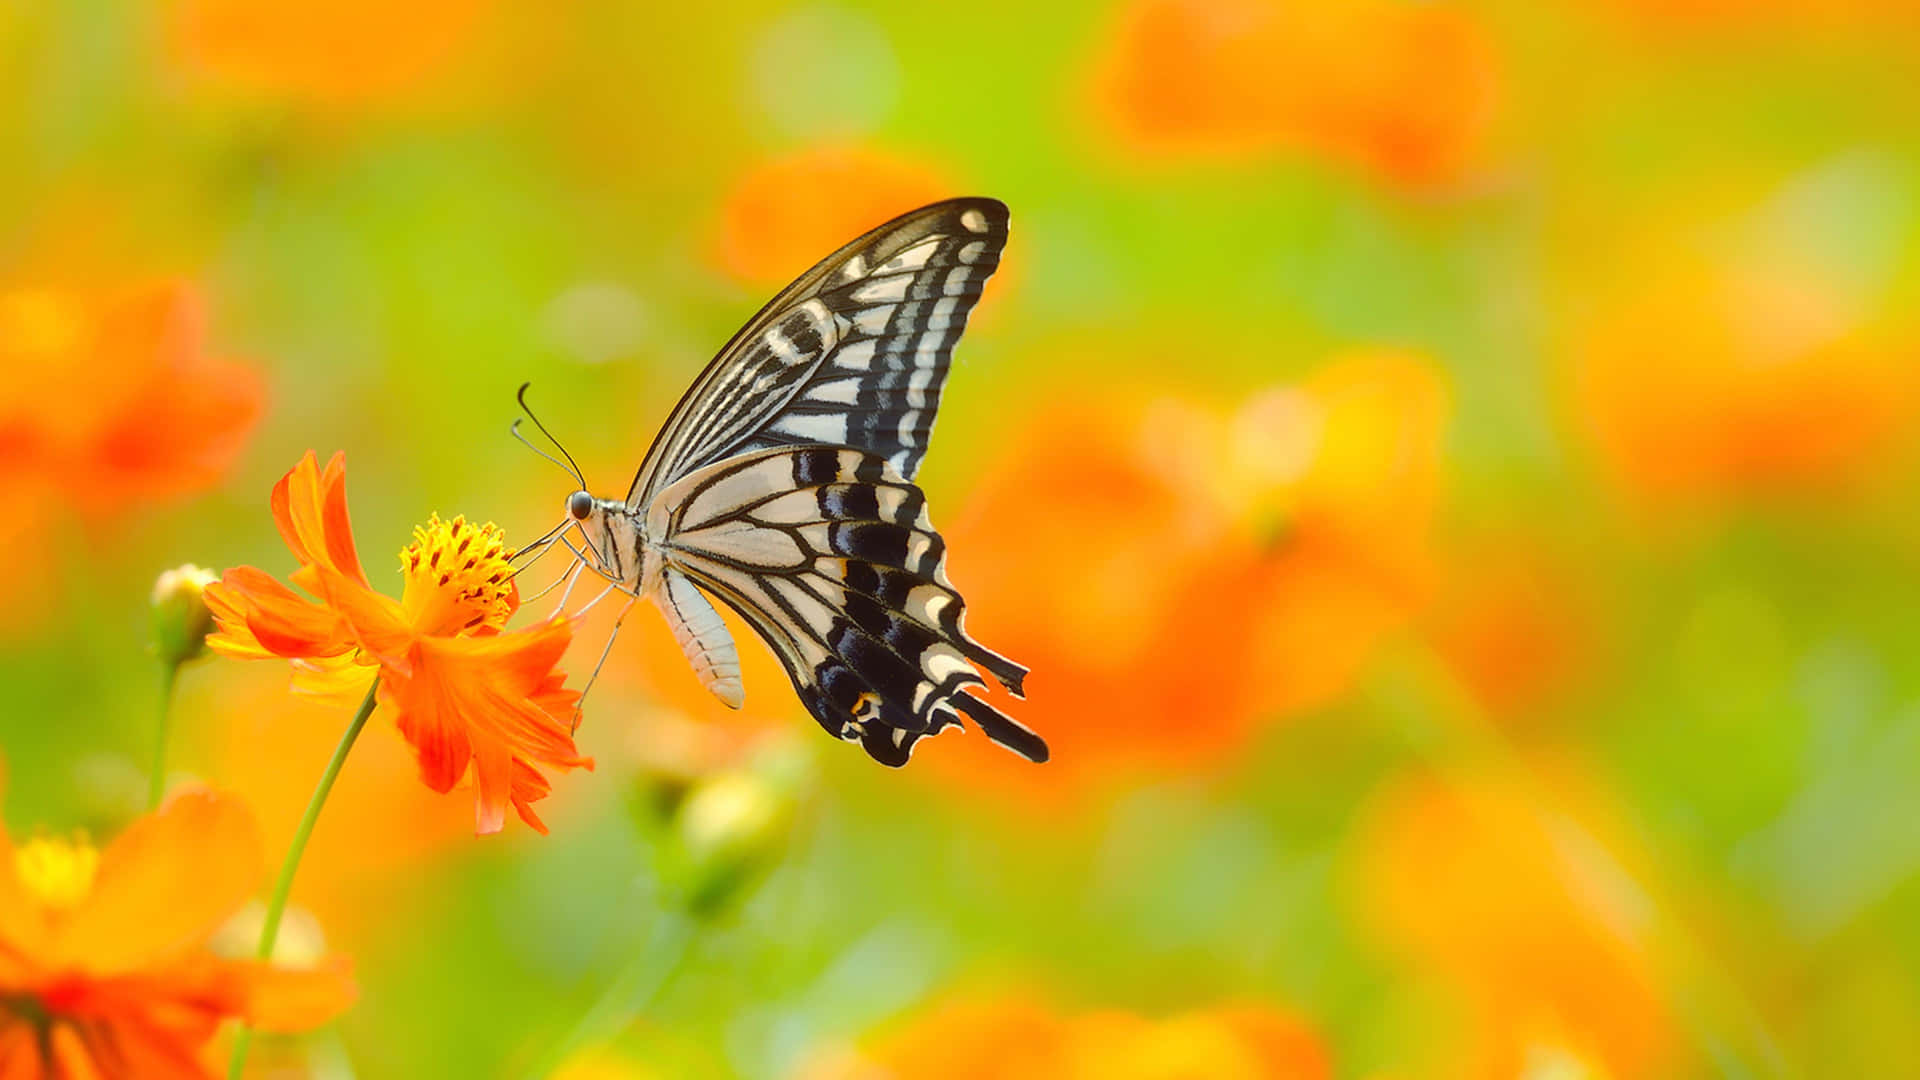 'The beauty of Nature captured in this Butterfly Photography.' Wallpaper